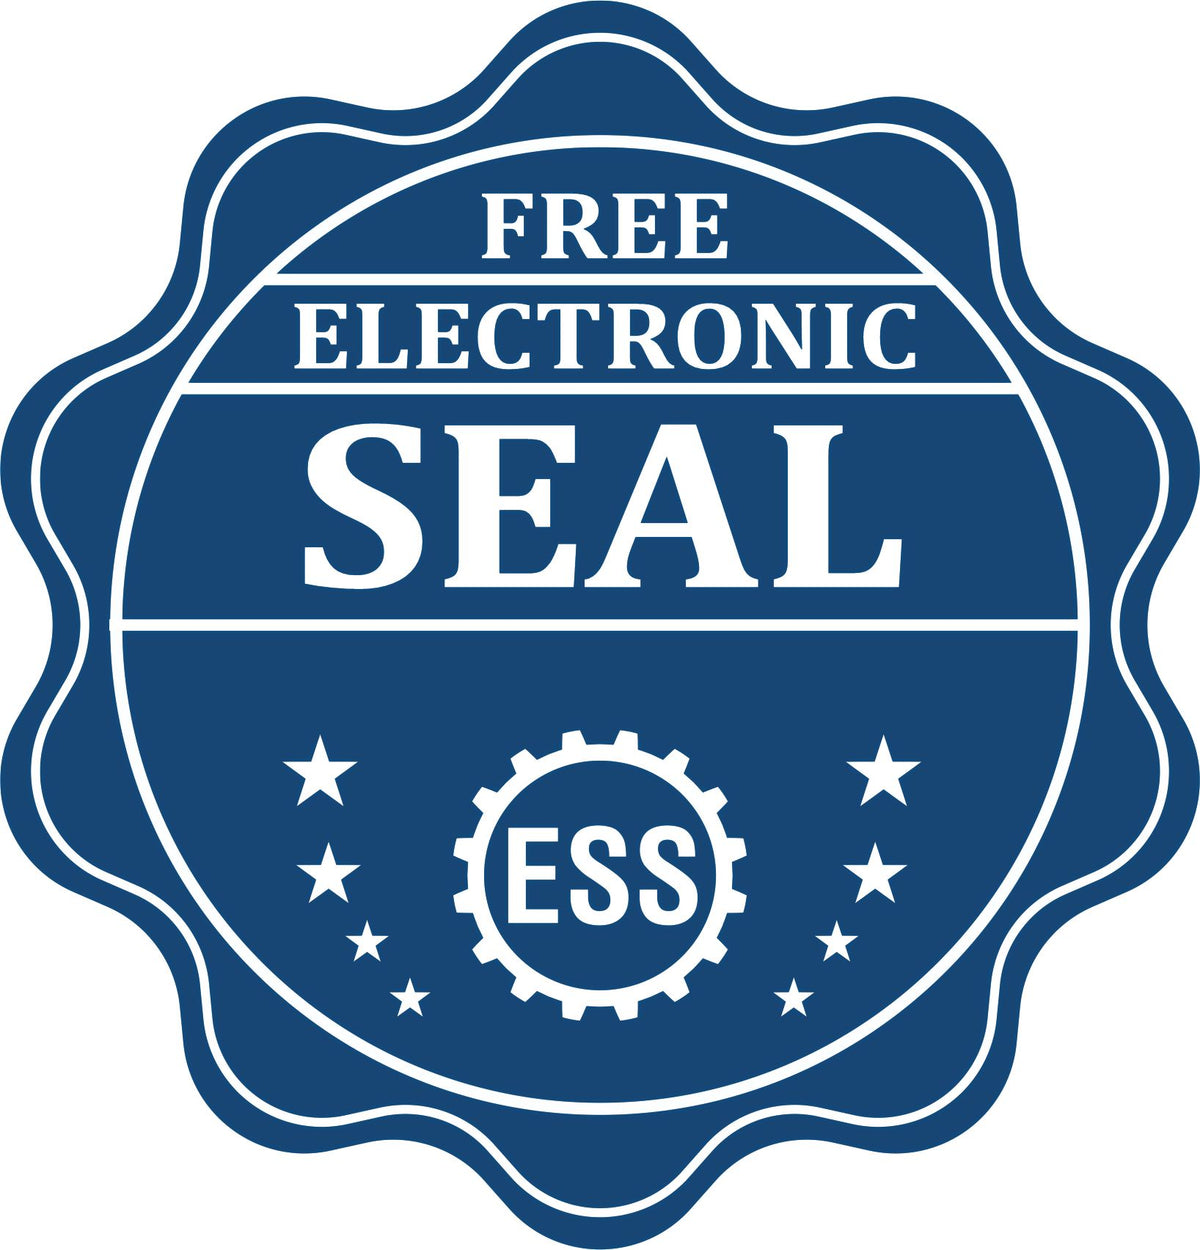 A badge showing a free electronic seal for the State of Kentucky Extended Long Reach Engineer Seal with stars and the ESS gear on the emblem.